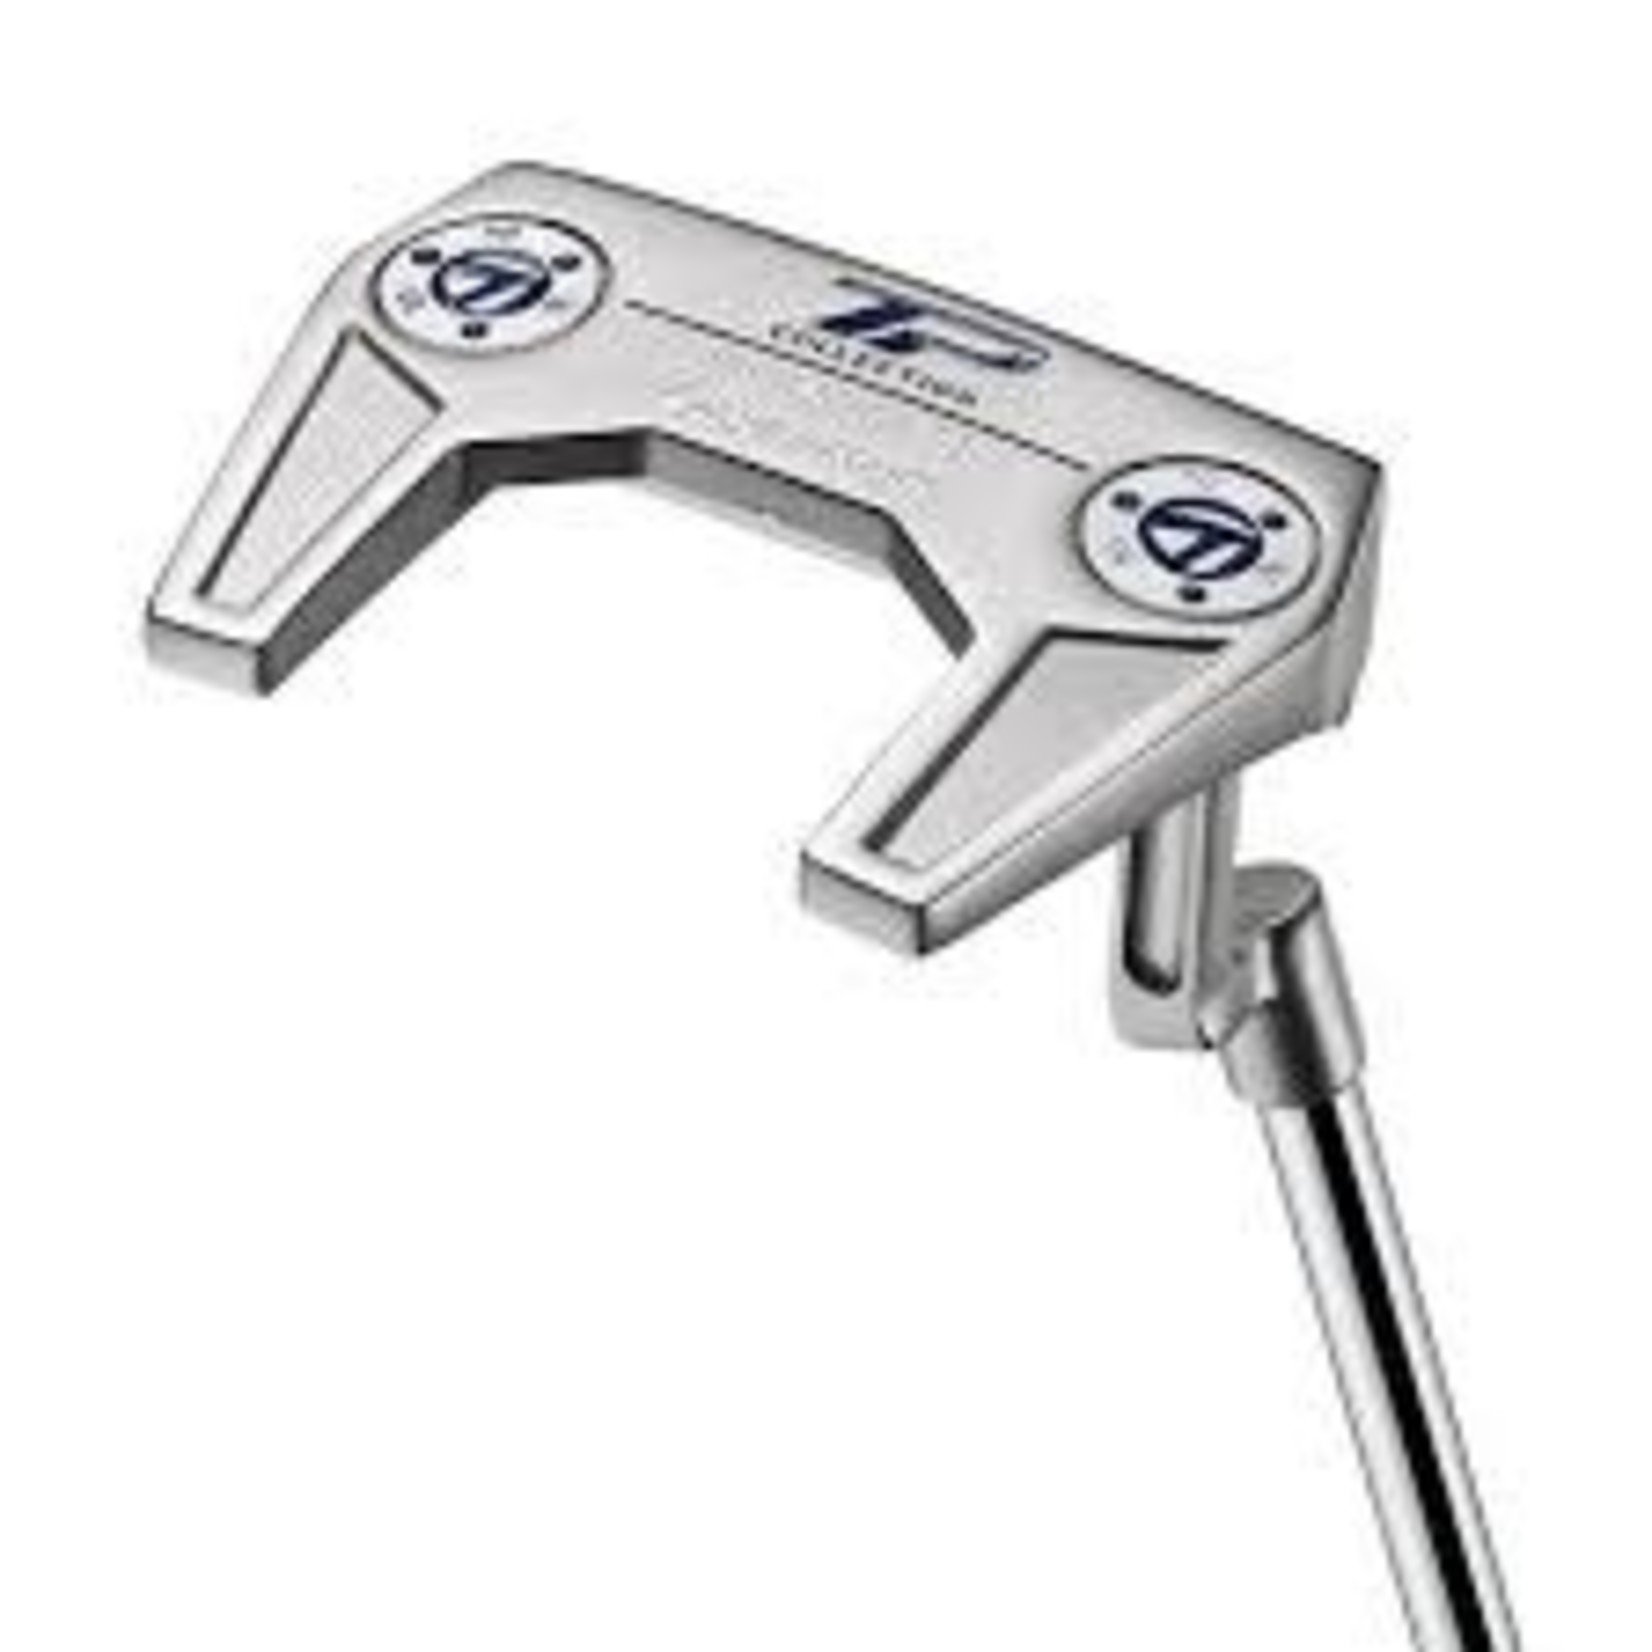 TAYLORMADE TAYLORMADE TP HYDROBLAST PUTTERS